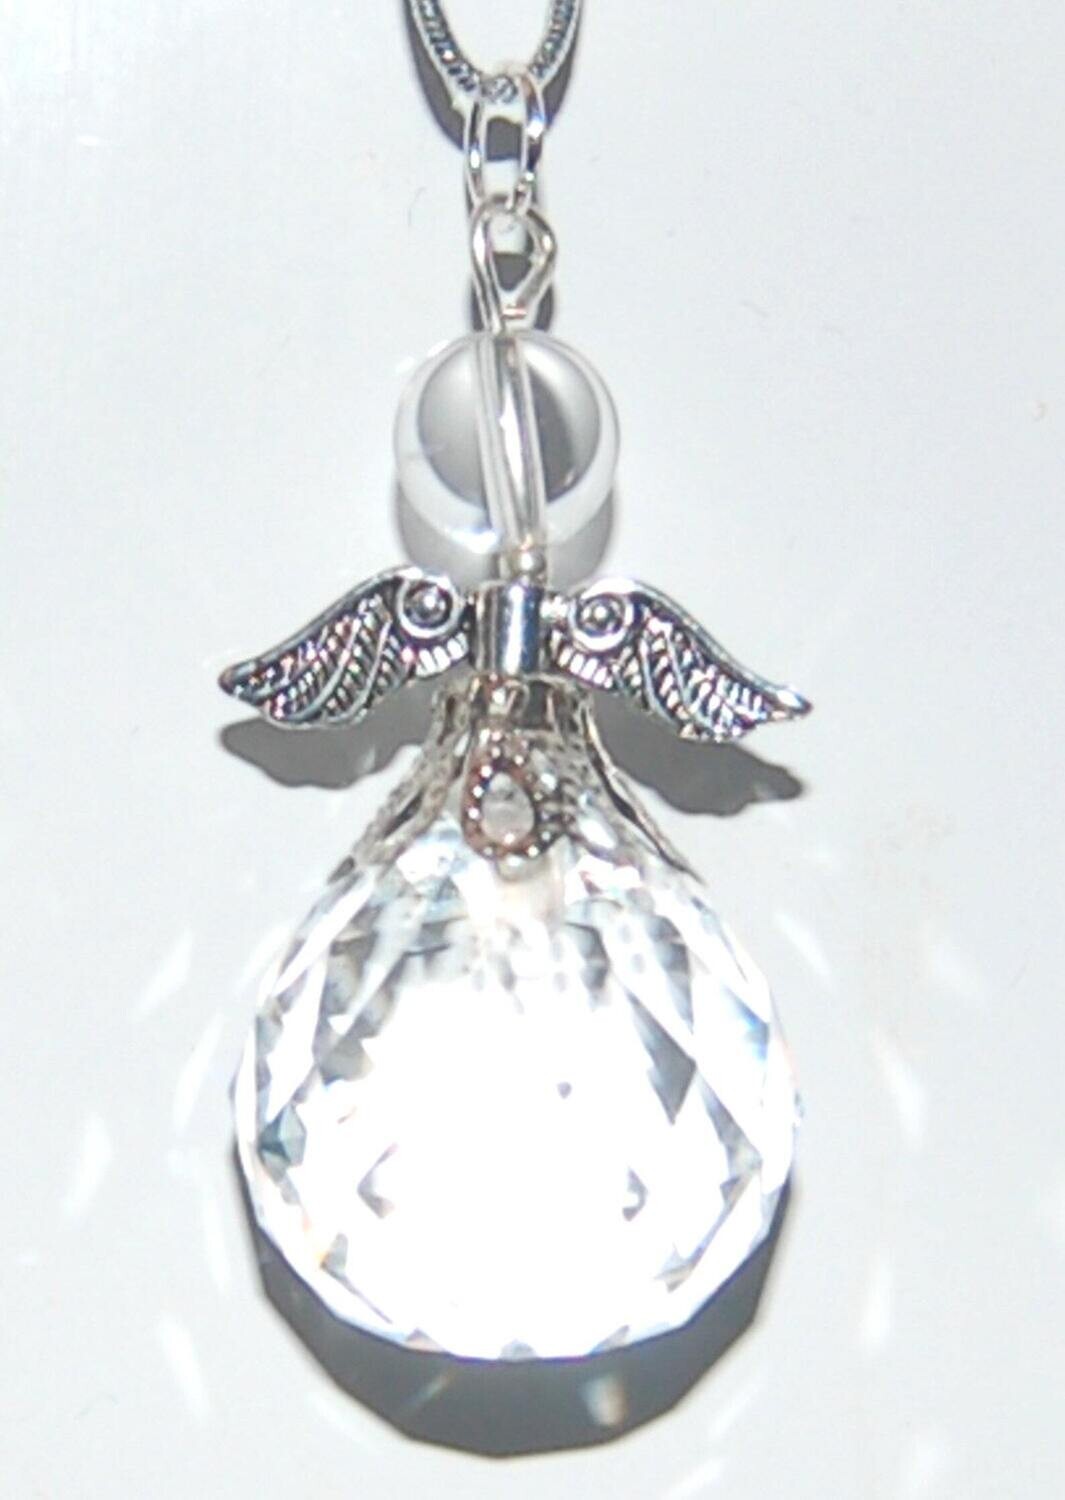 Beautiful Handcrafted Crystal Guardian Angel - Suncatcher - Feng Sui Charm Xmas Tree Decoration - UK Selle